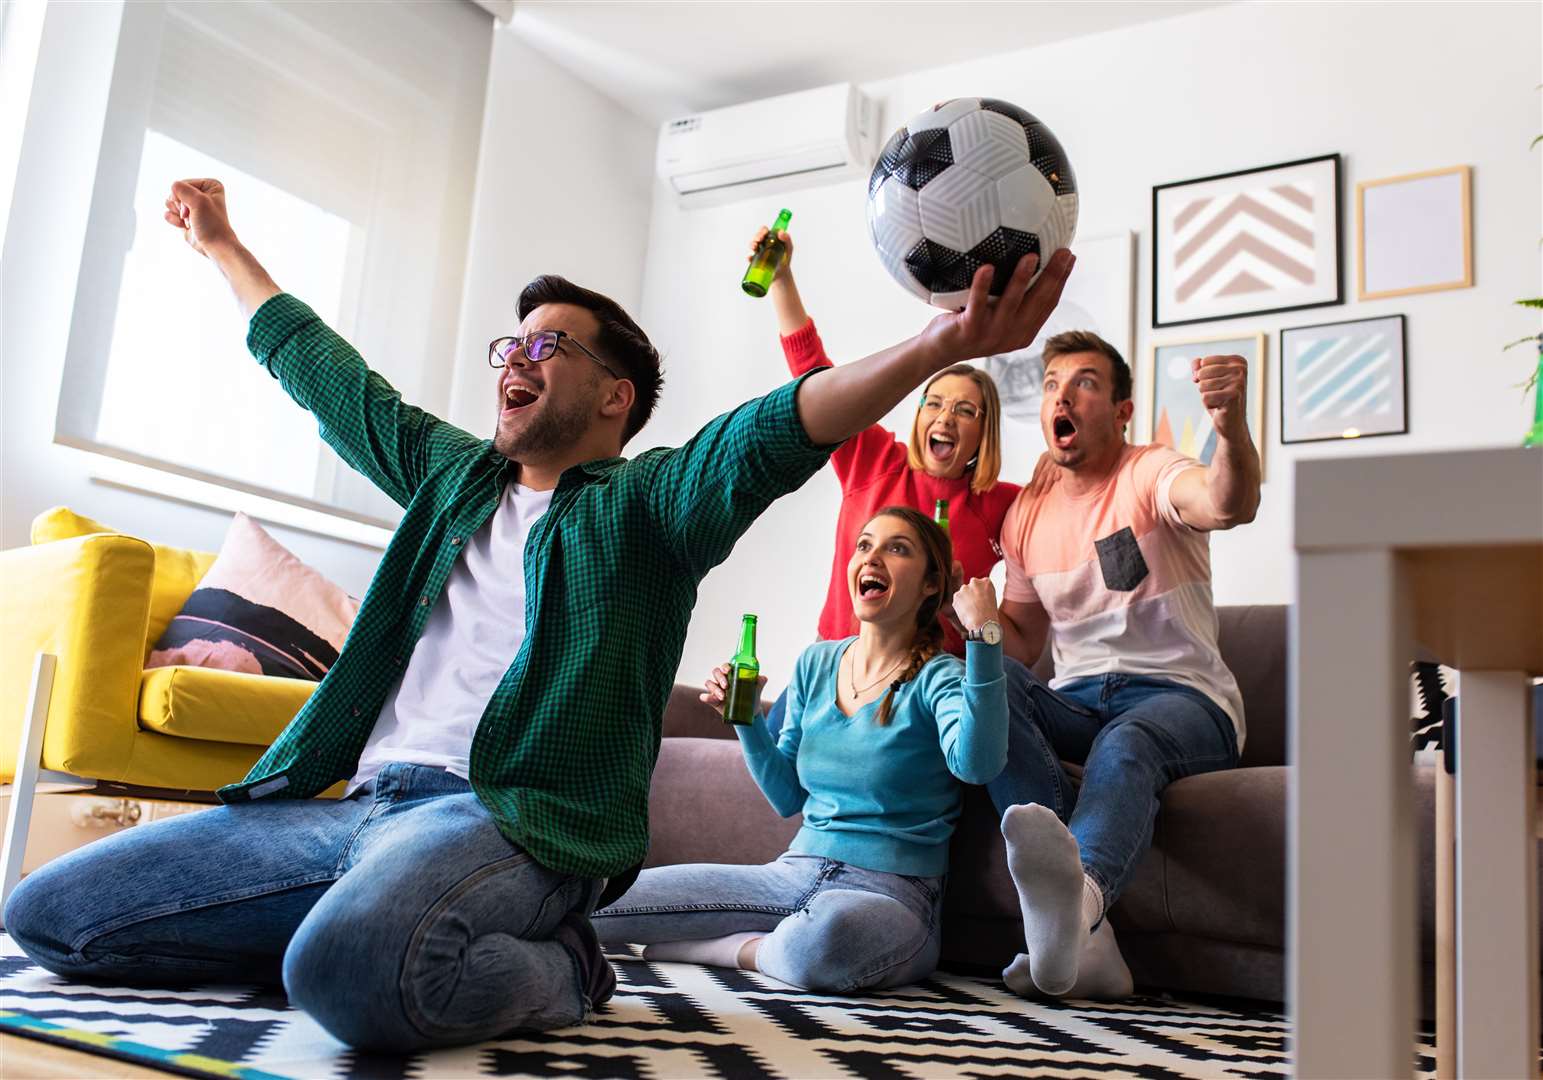 Football fans playing with a football, often inside, led to a rise in insurance claims in 2018. Image: iStock.